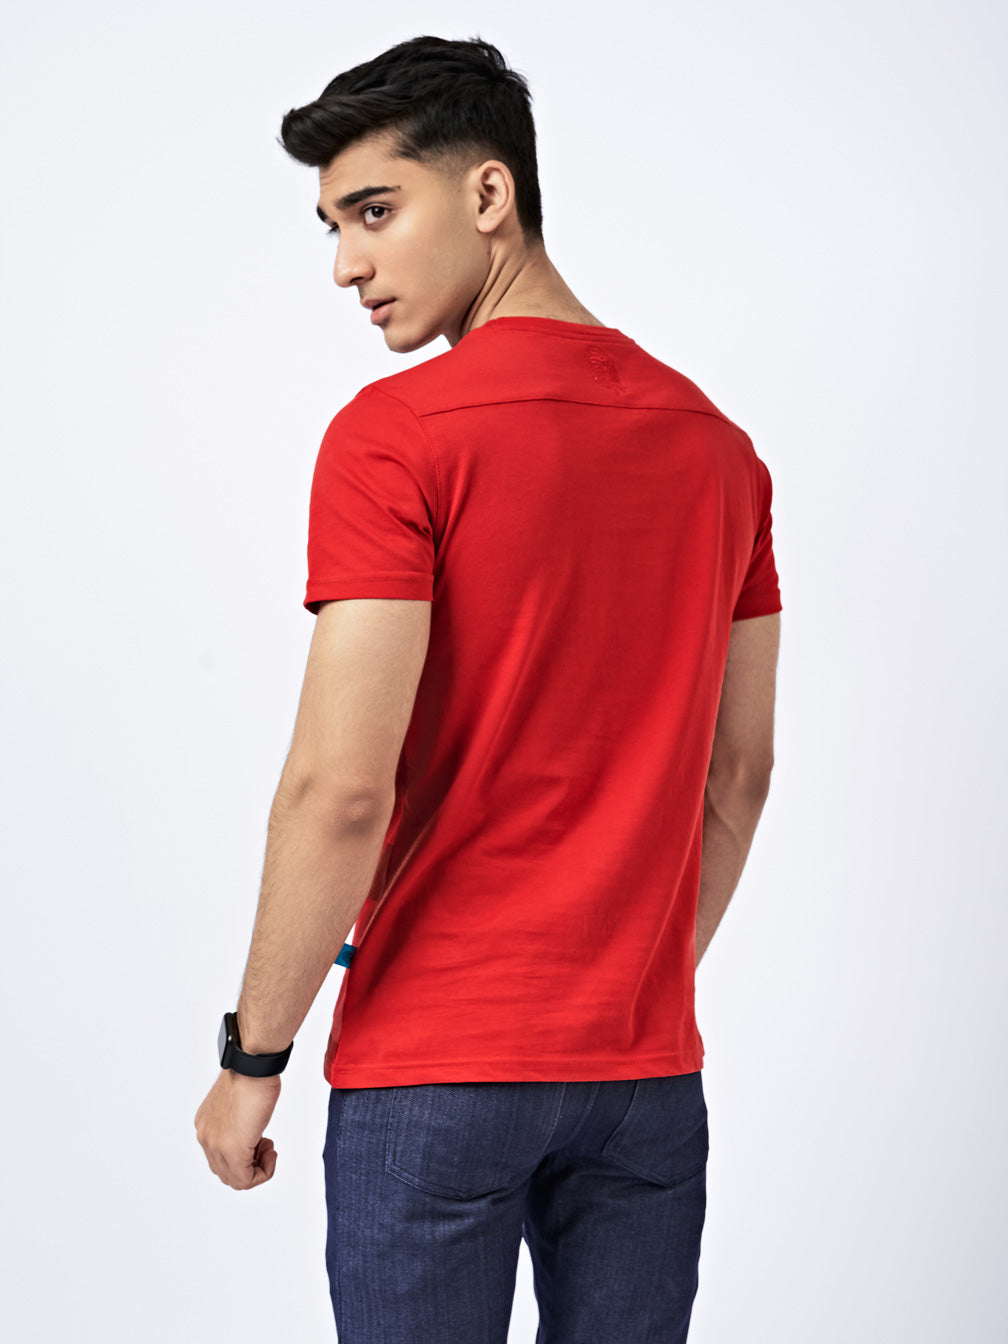 Men's Oversized Graphic T-Shirt Red